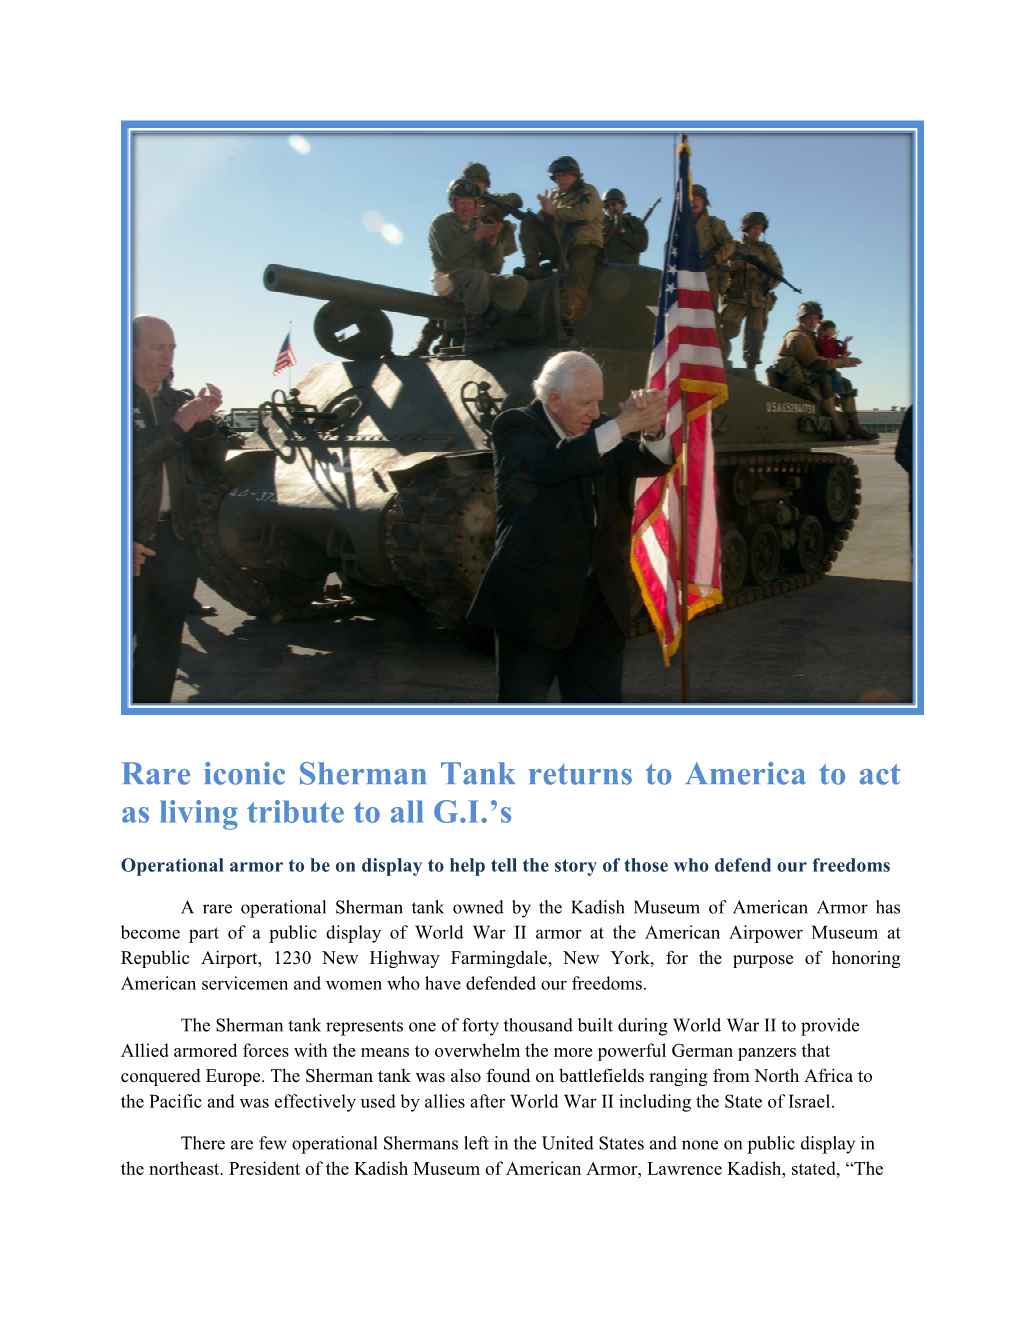 Rare Iconic Sherman Tank Returns to America to Act As Living Tribute to All G.I.’S